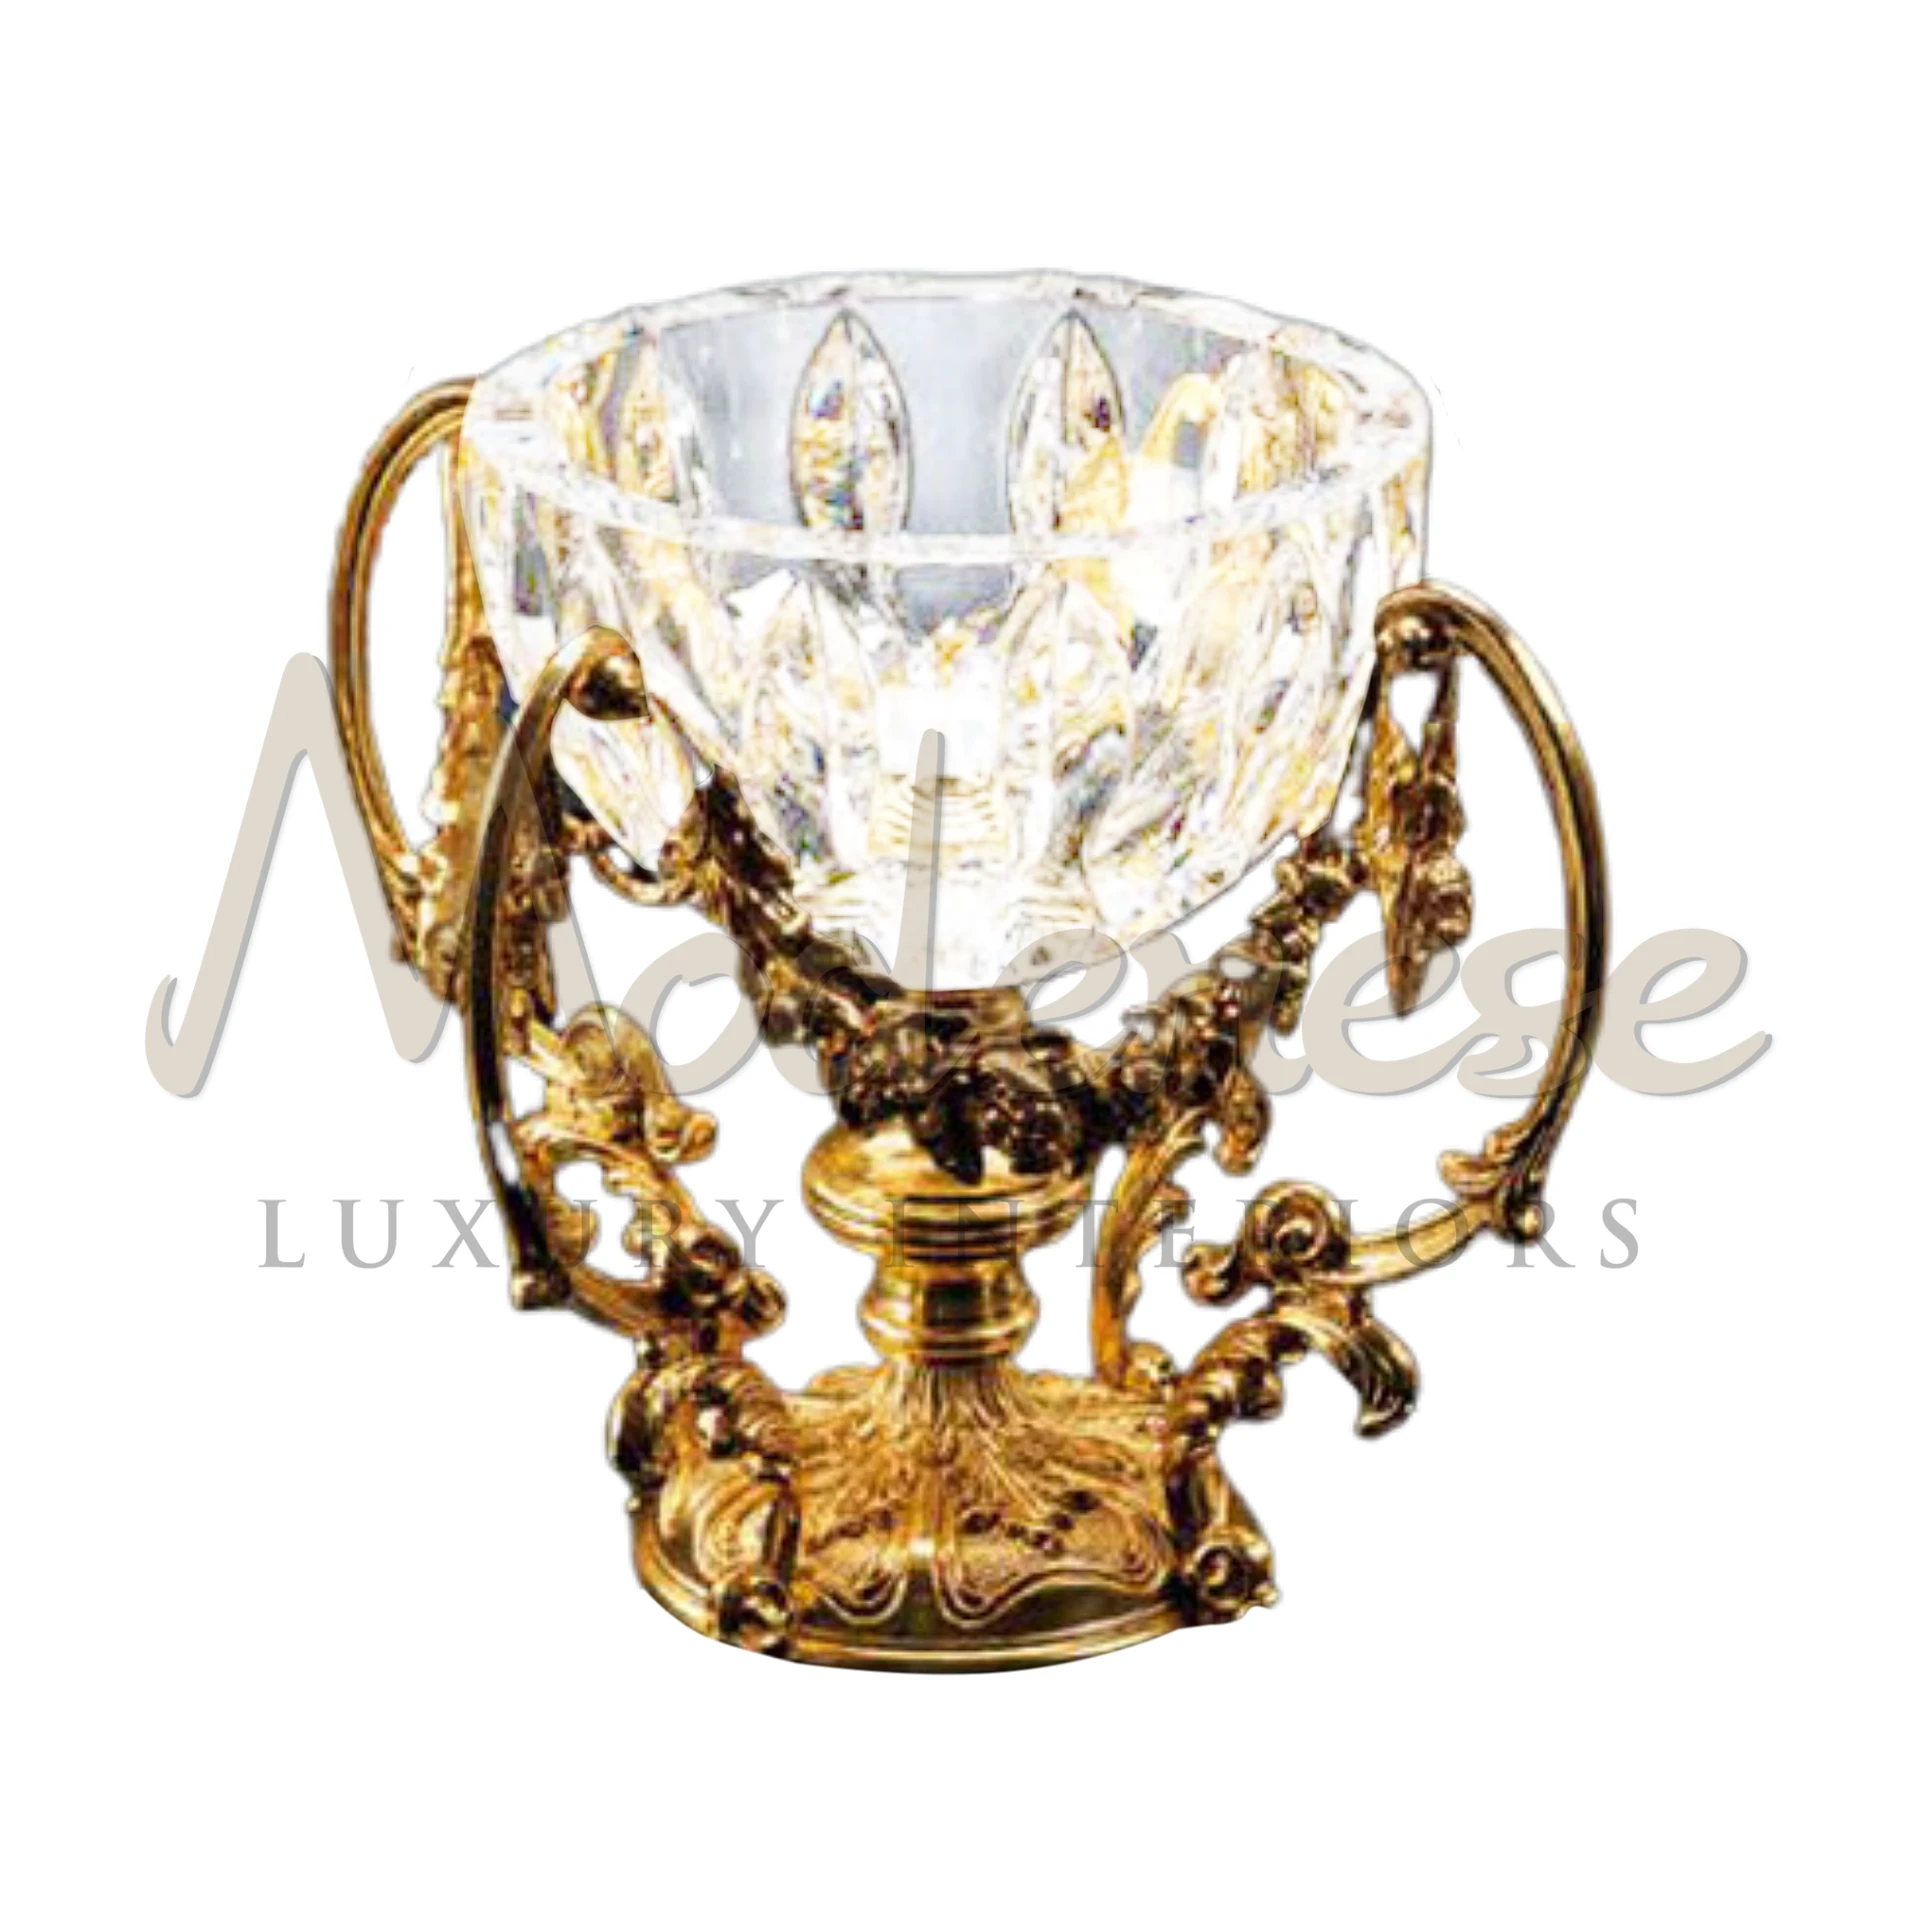 Modenese Victorian Glass Vase with Gold Elements, epitomizing classic luxury and intricate craftsmanship for sophisticated decor.